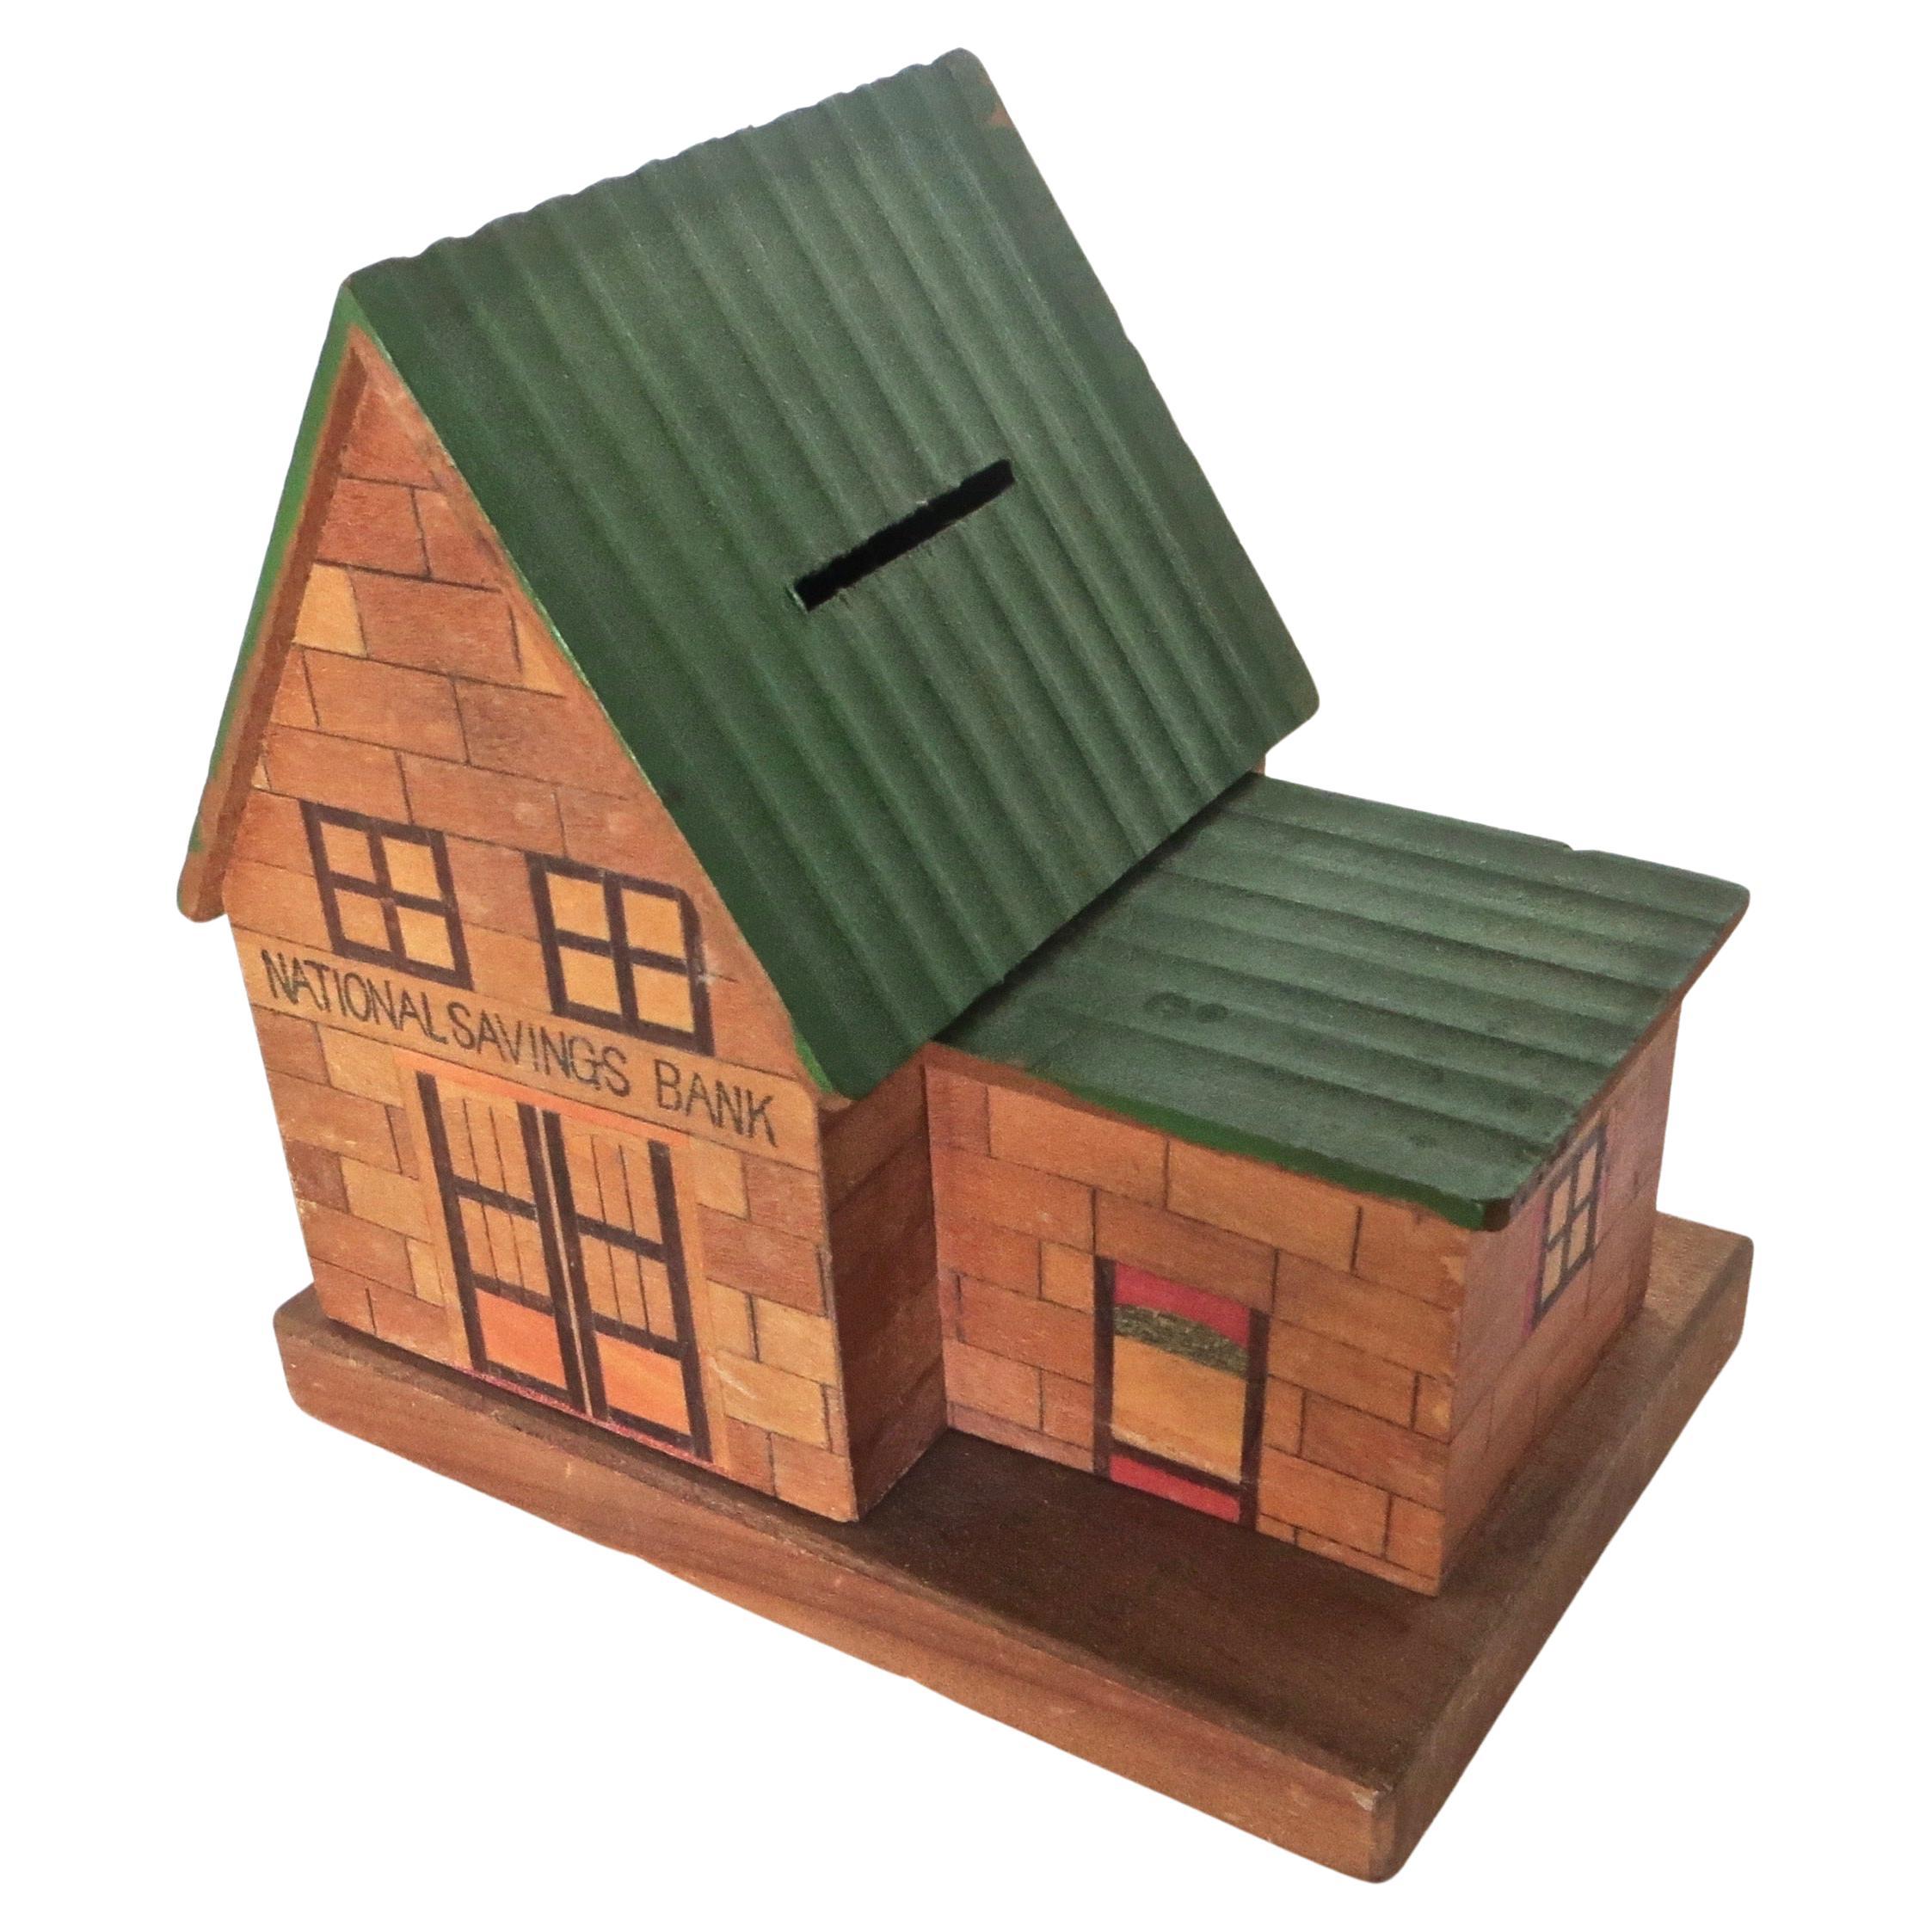 Japanese Puzzle Bank Portrays A Building Bank "National Savings Bank" Circa 1948 For Sale